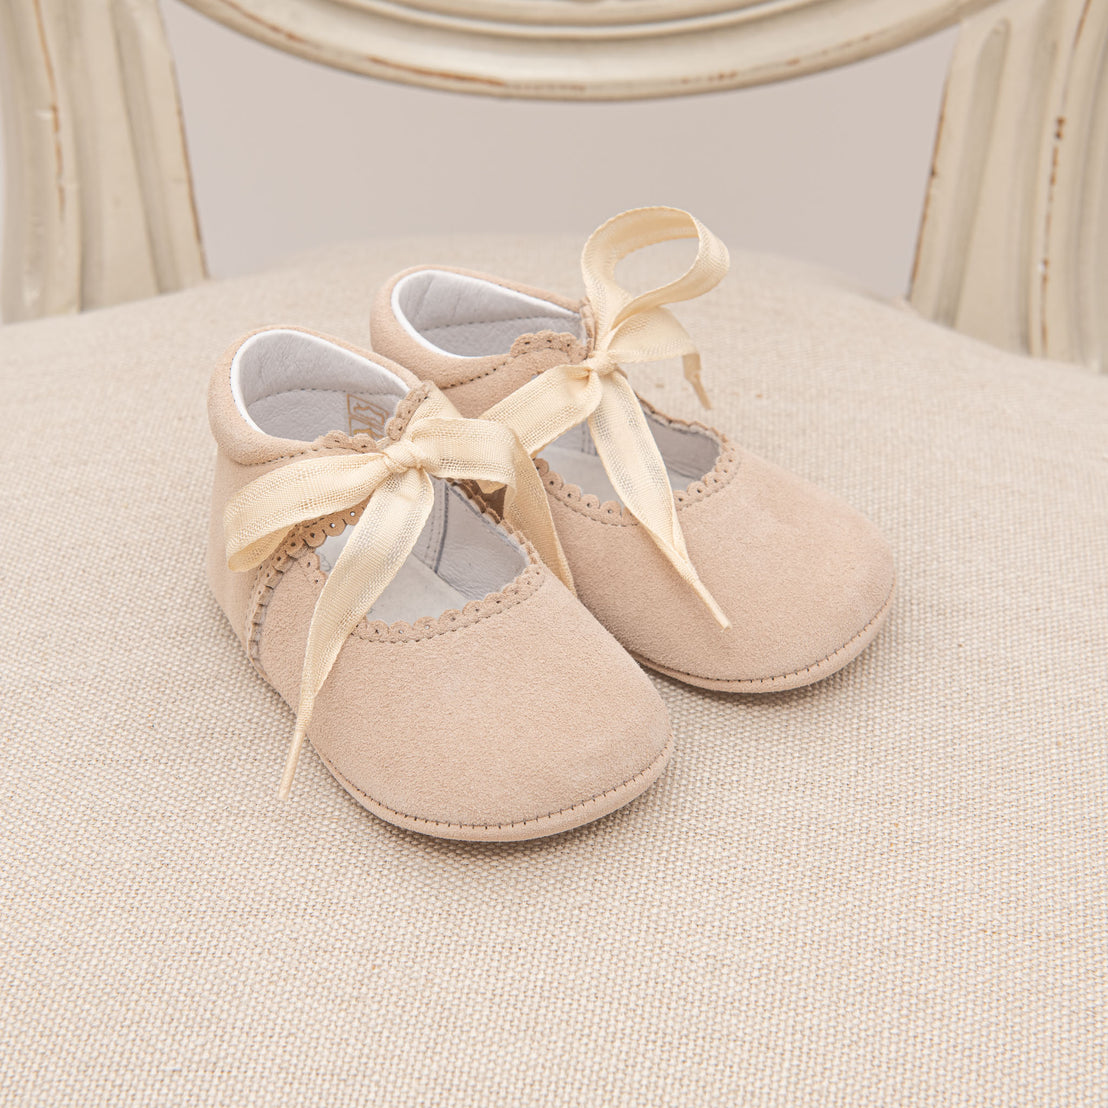 Pair of Kristina Tie Mary Janes with ribbon ties on a white cushioned chair, showcasing soft, suede-like texture and delicate lace details for a christening.